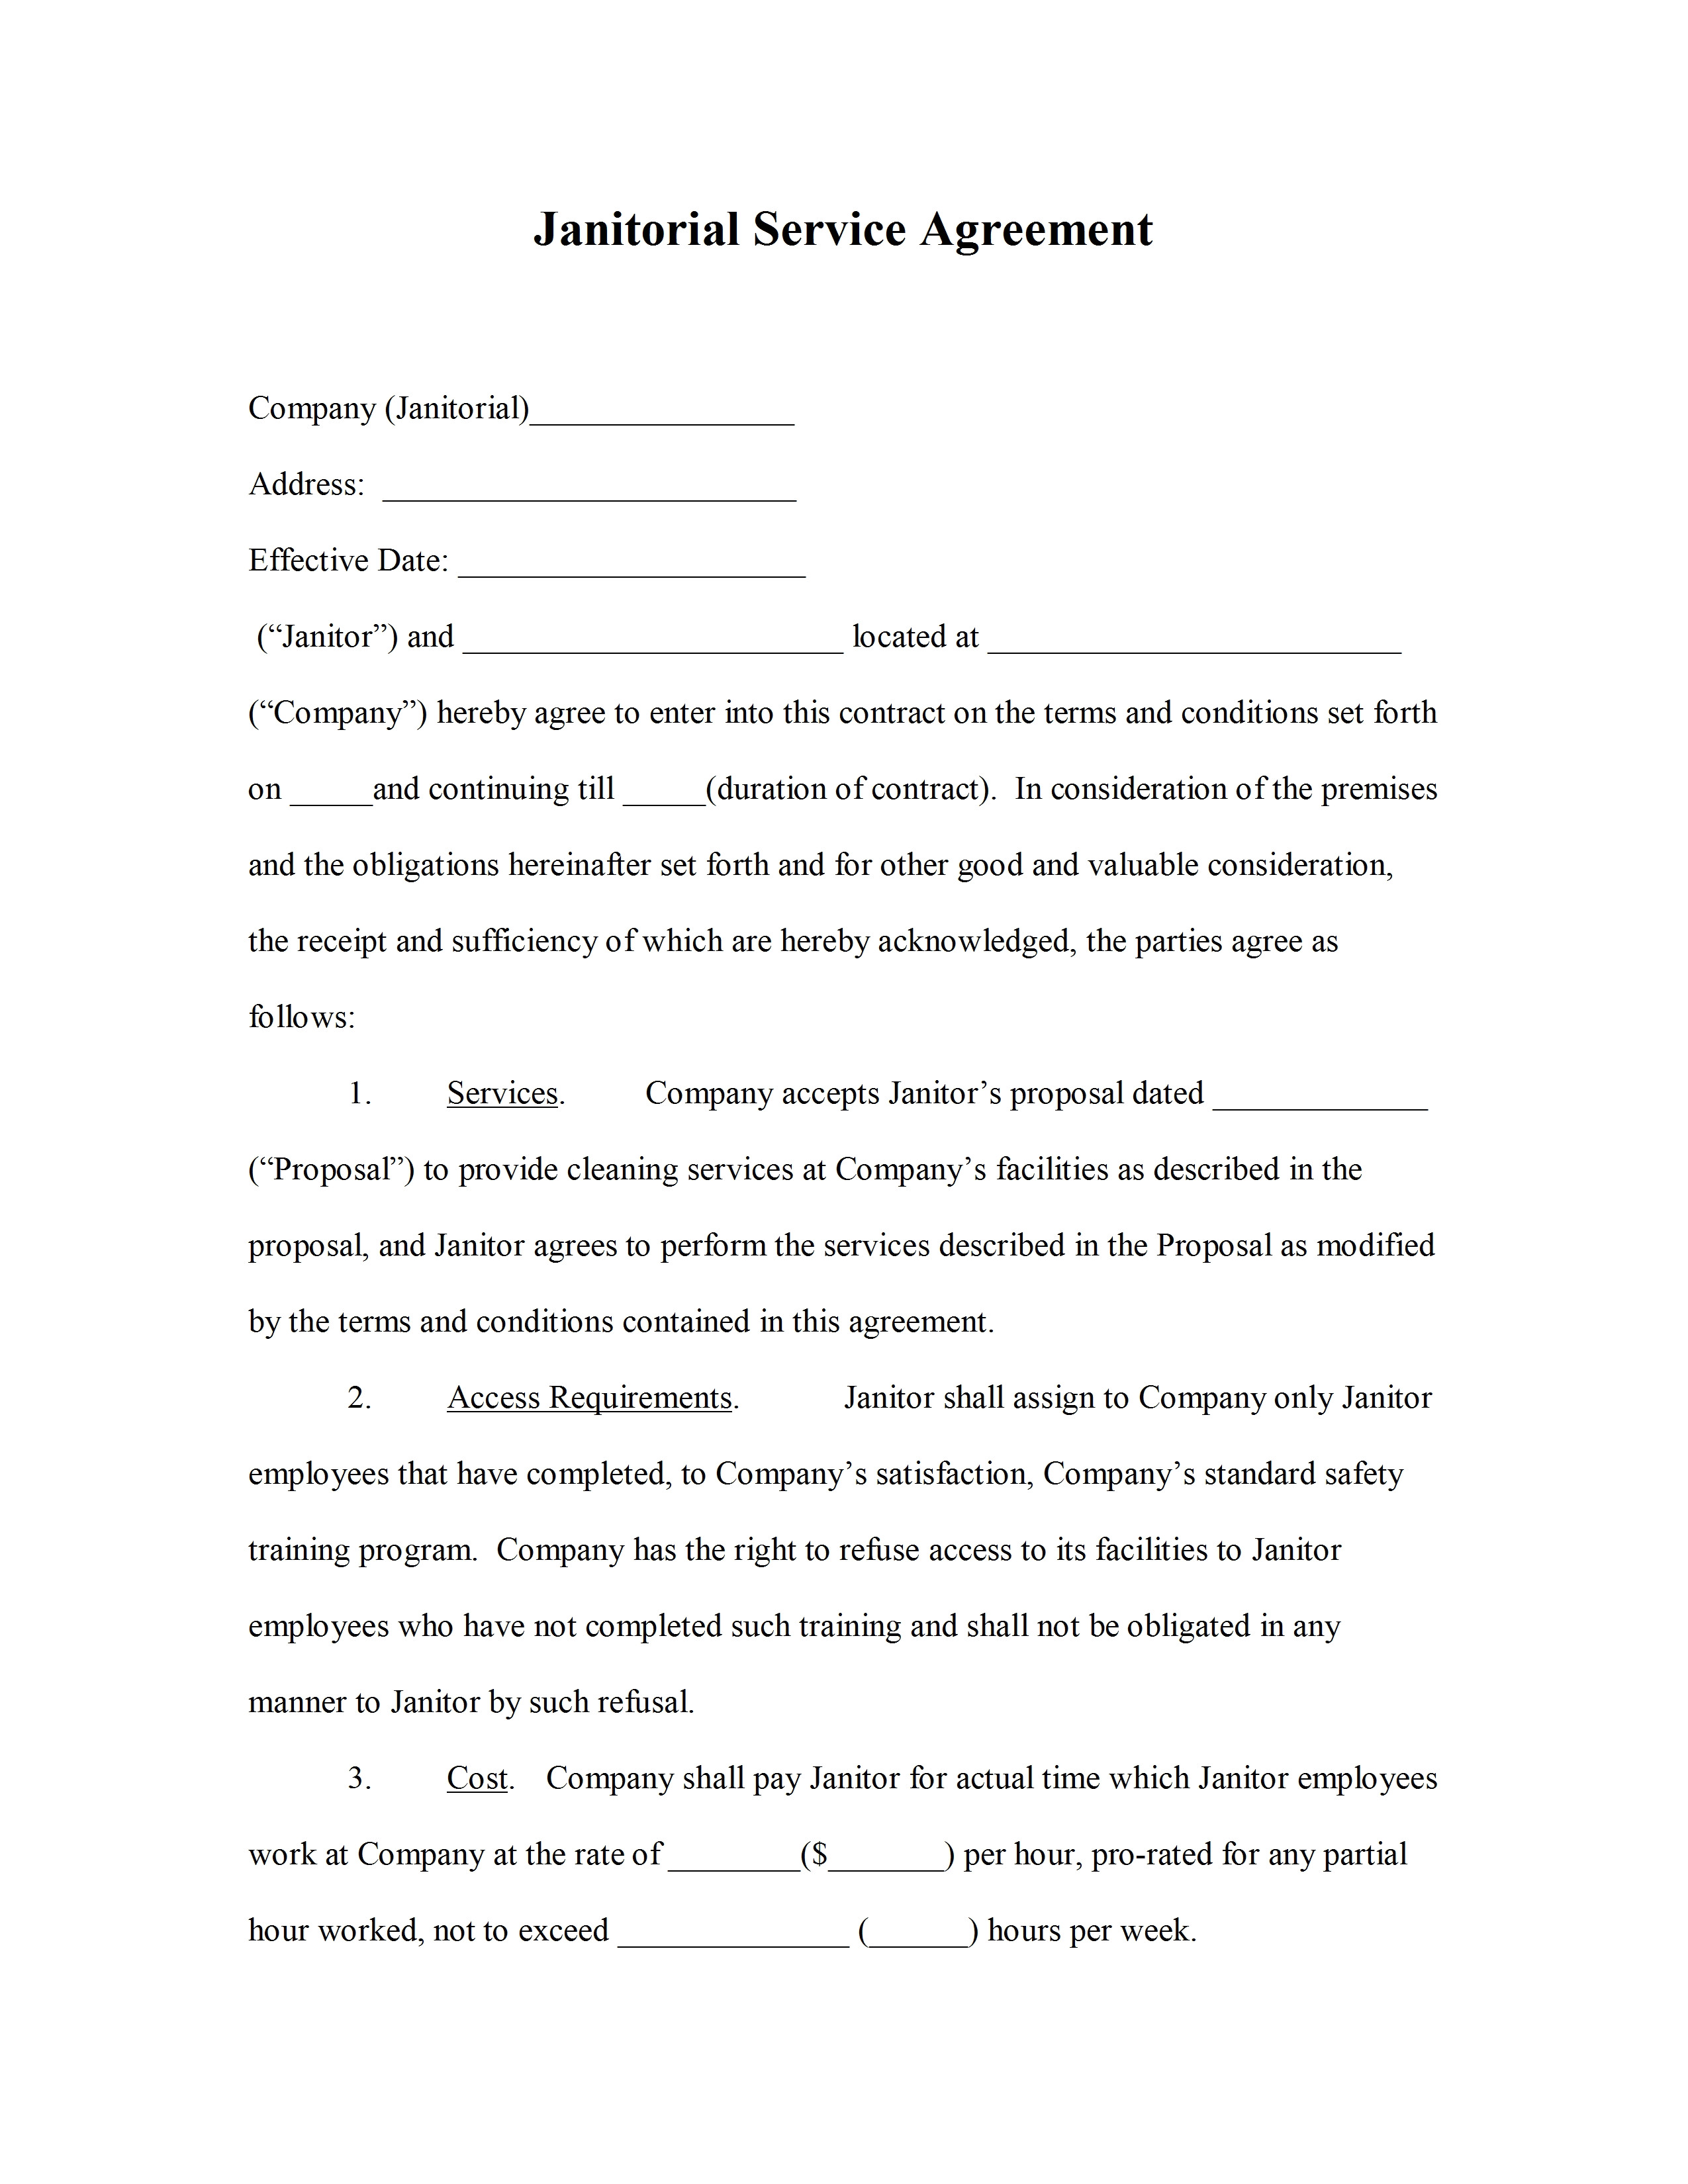 janitorial agreement template